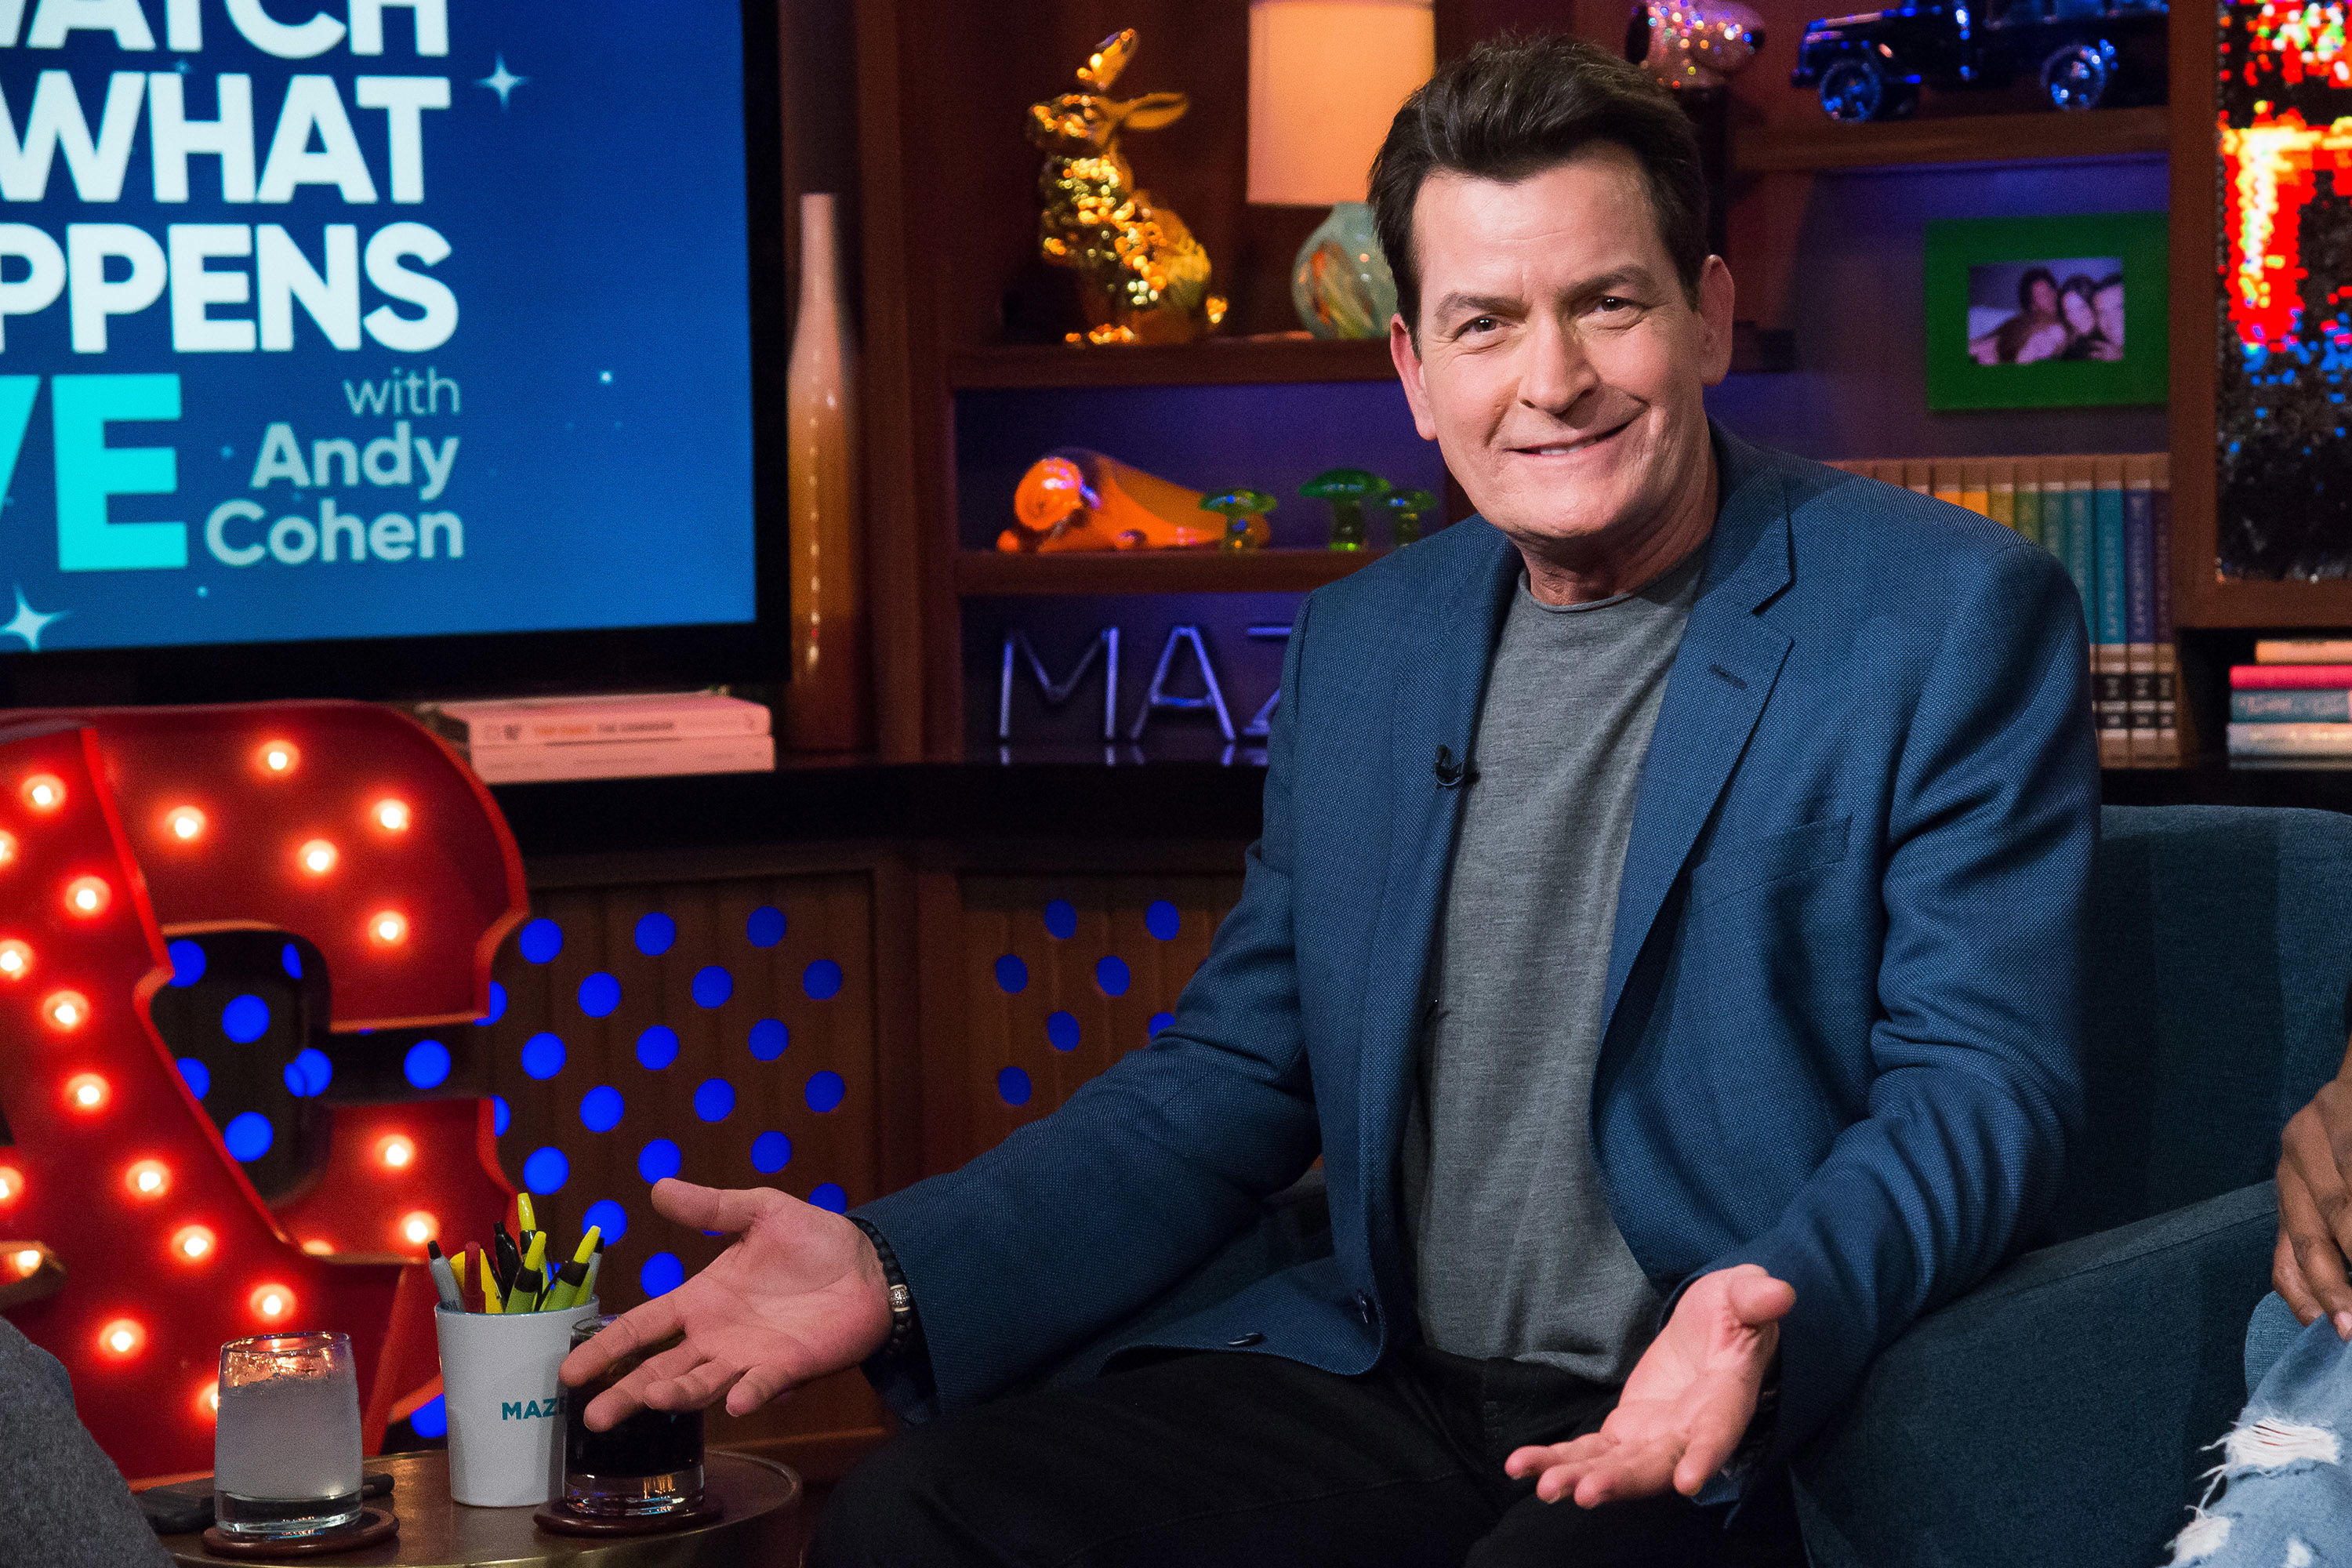 Closeup of Charlie Sheen on the set of Watch What Happens with Andy Cohen